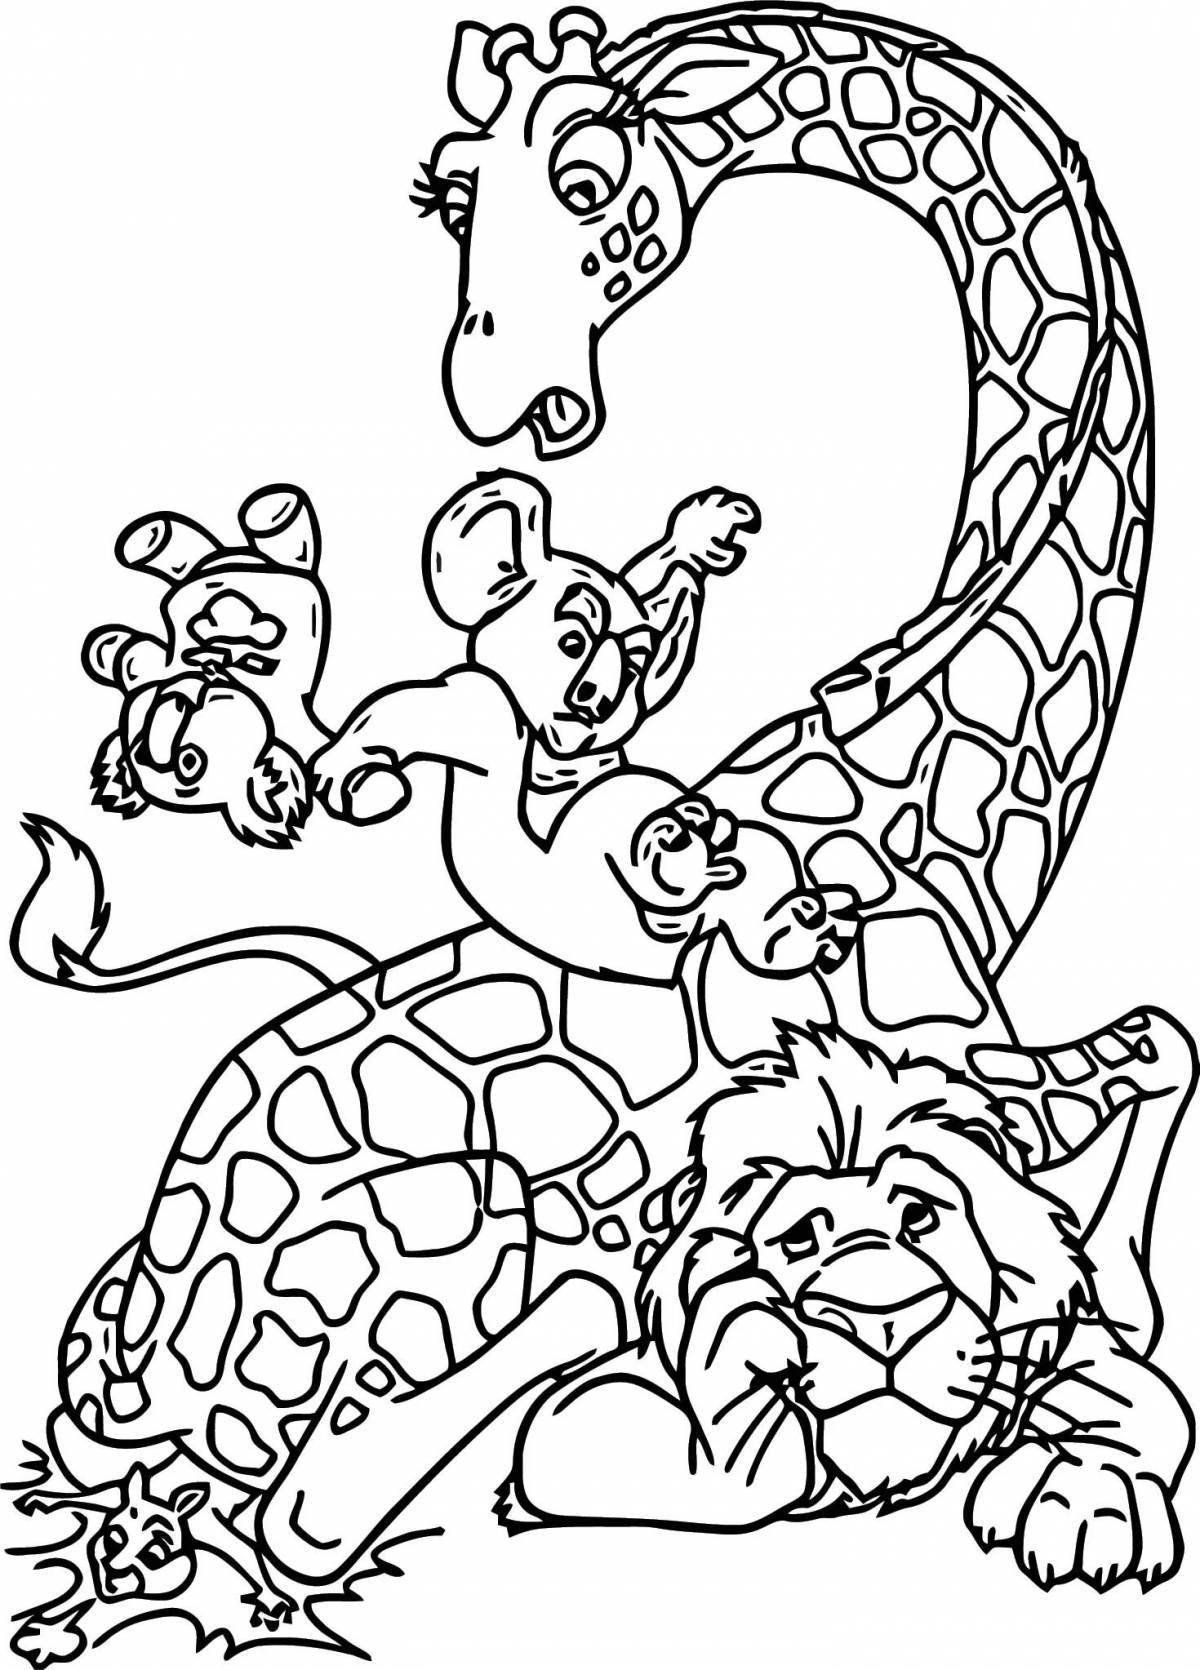 Live 10 year old animals coloring book